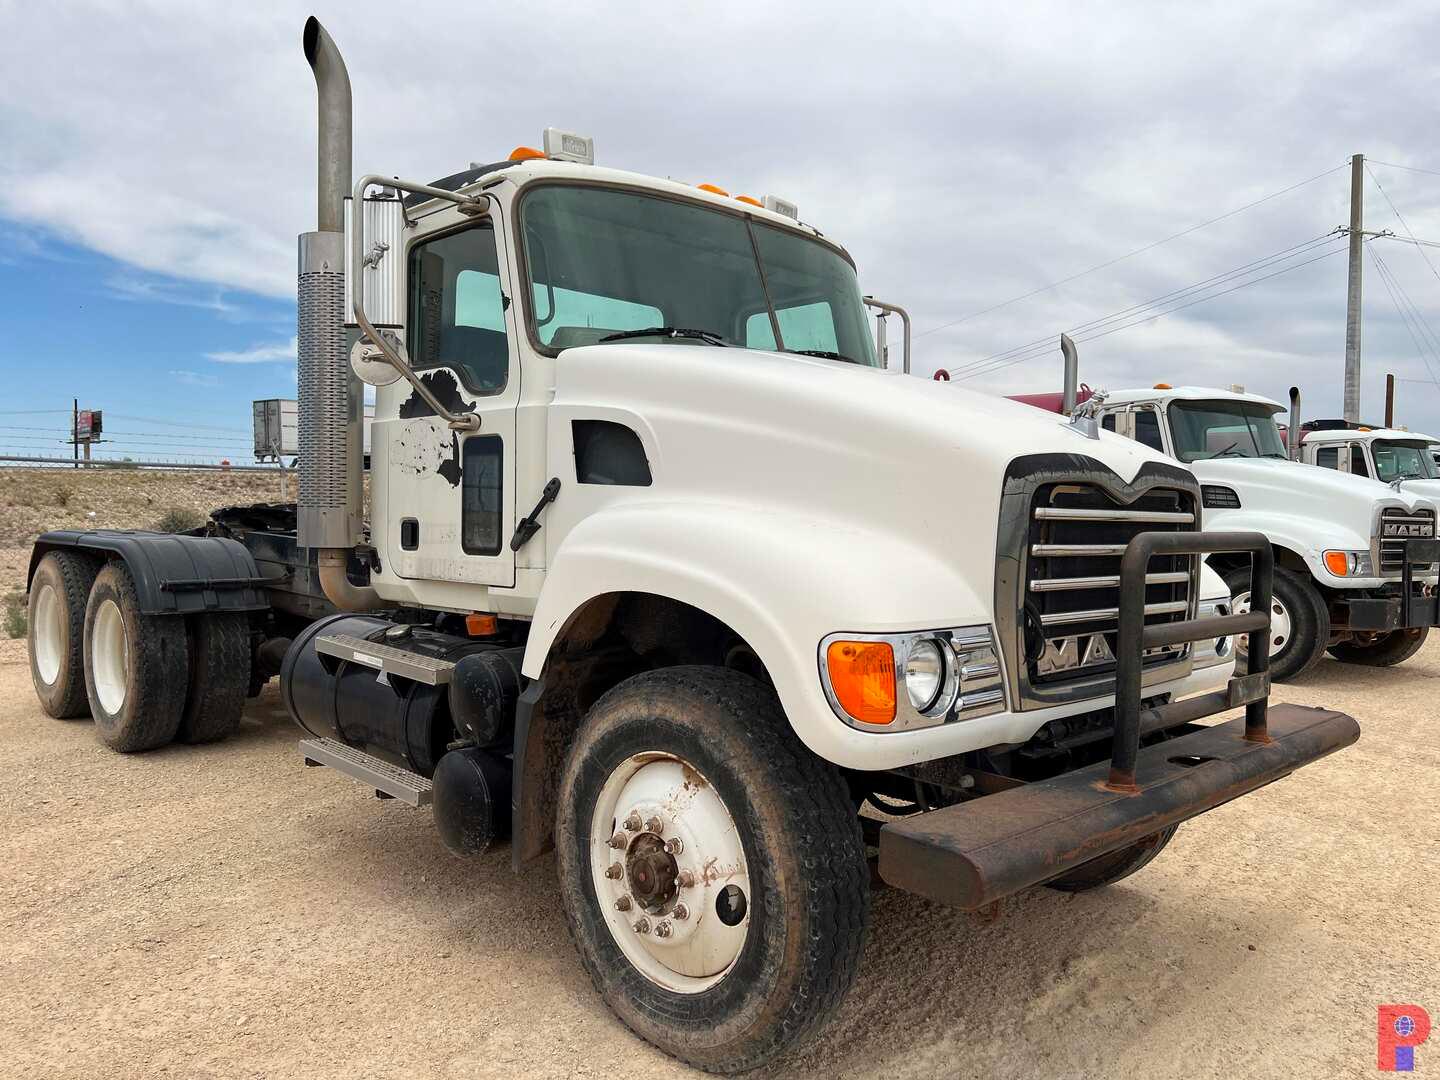 2006 MACK CV713 T/A DAYCAB HAUL TRUCK ODOMETER READS 356,106 MILES, METER R